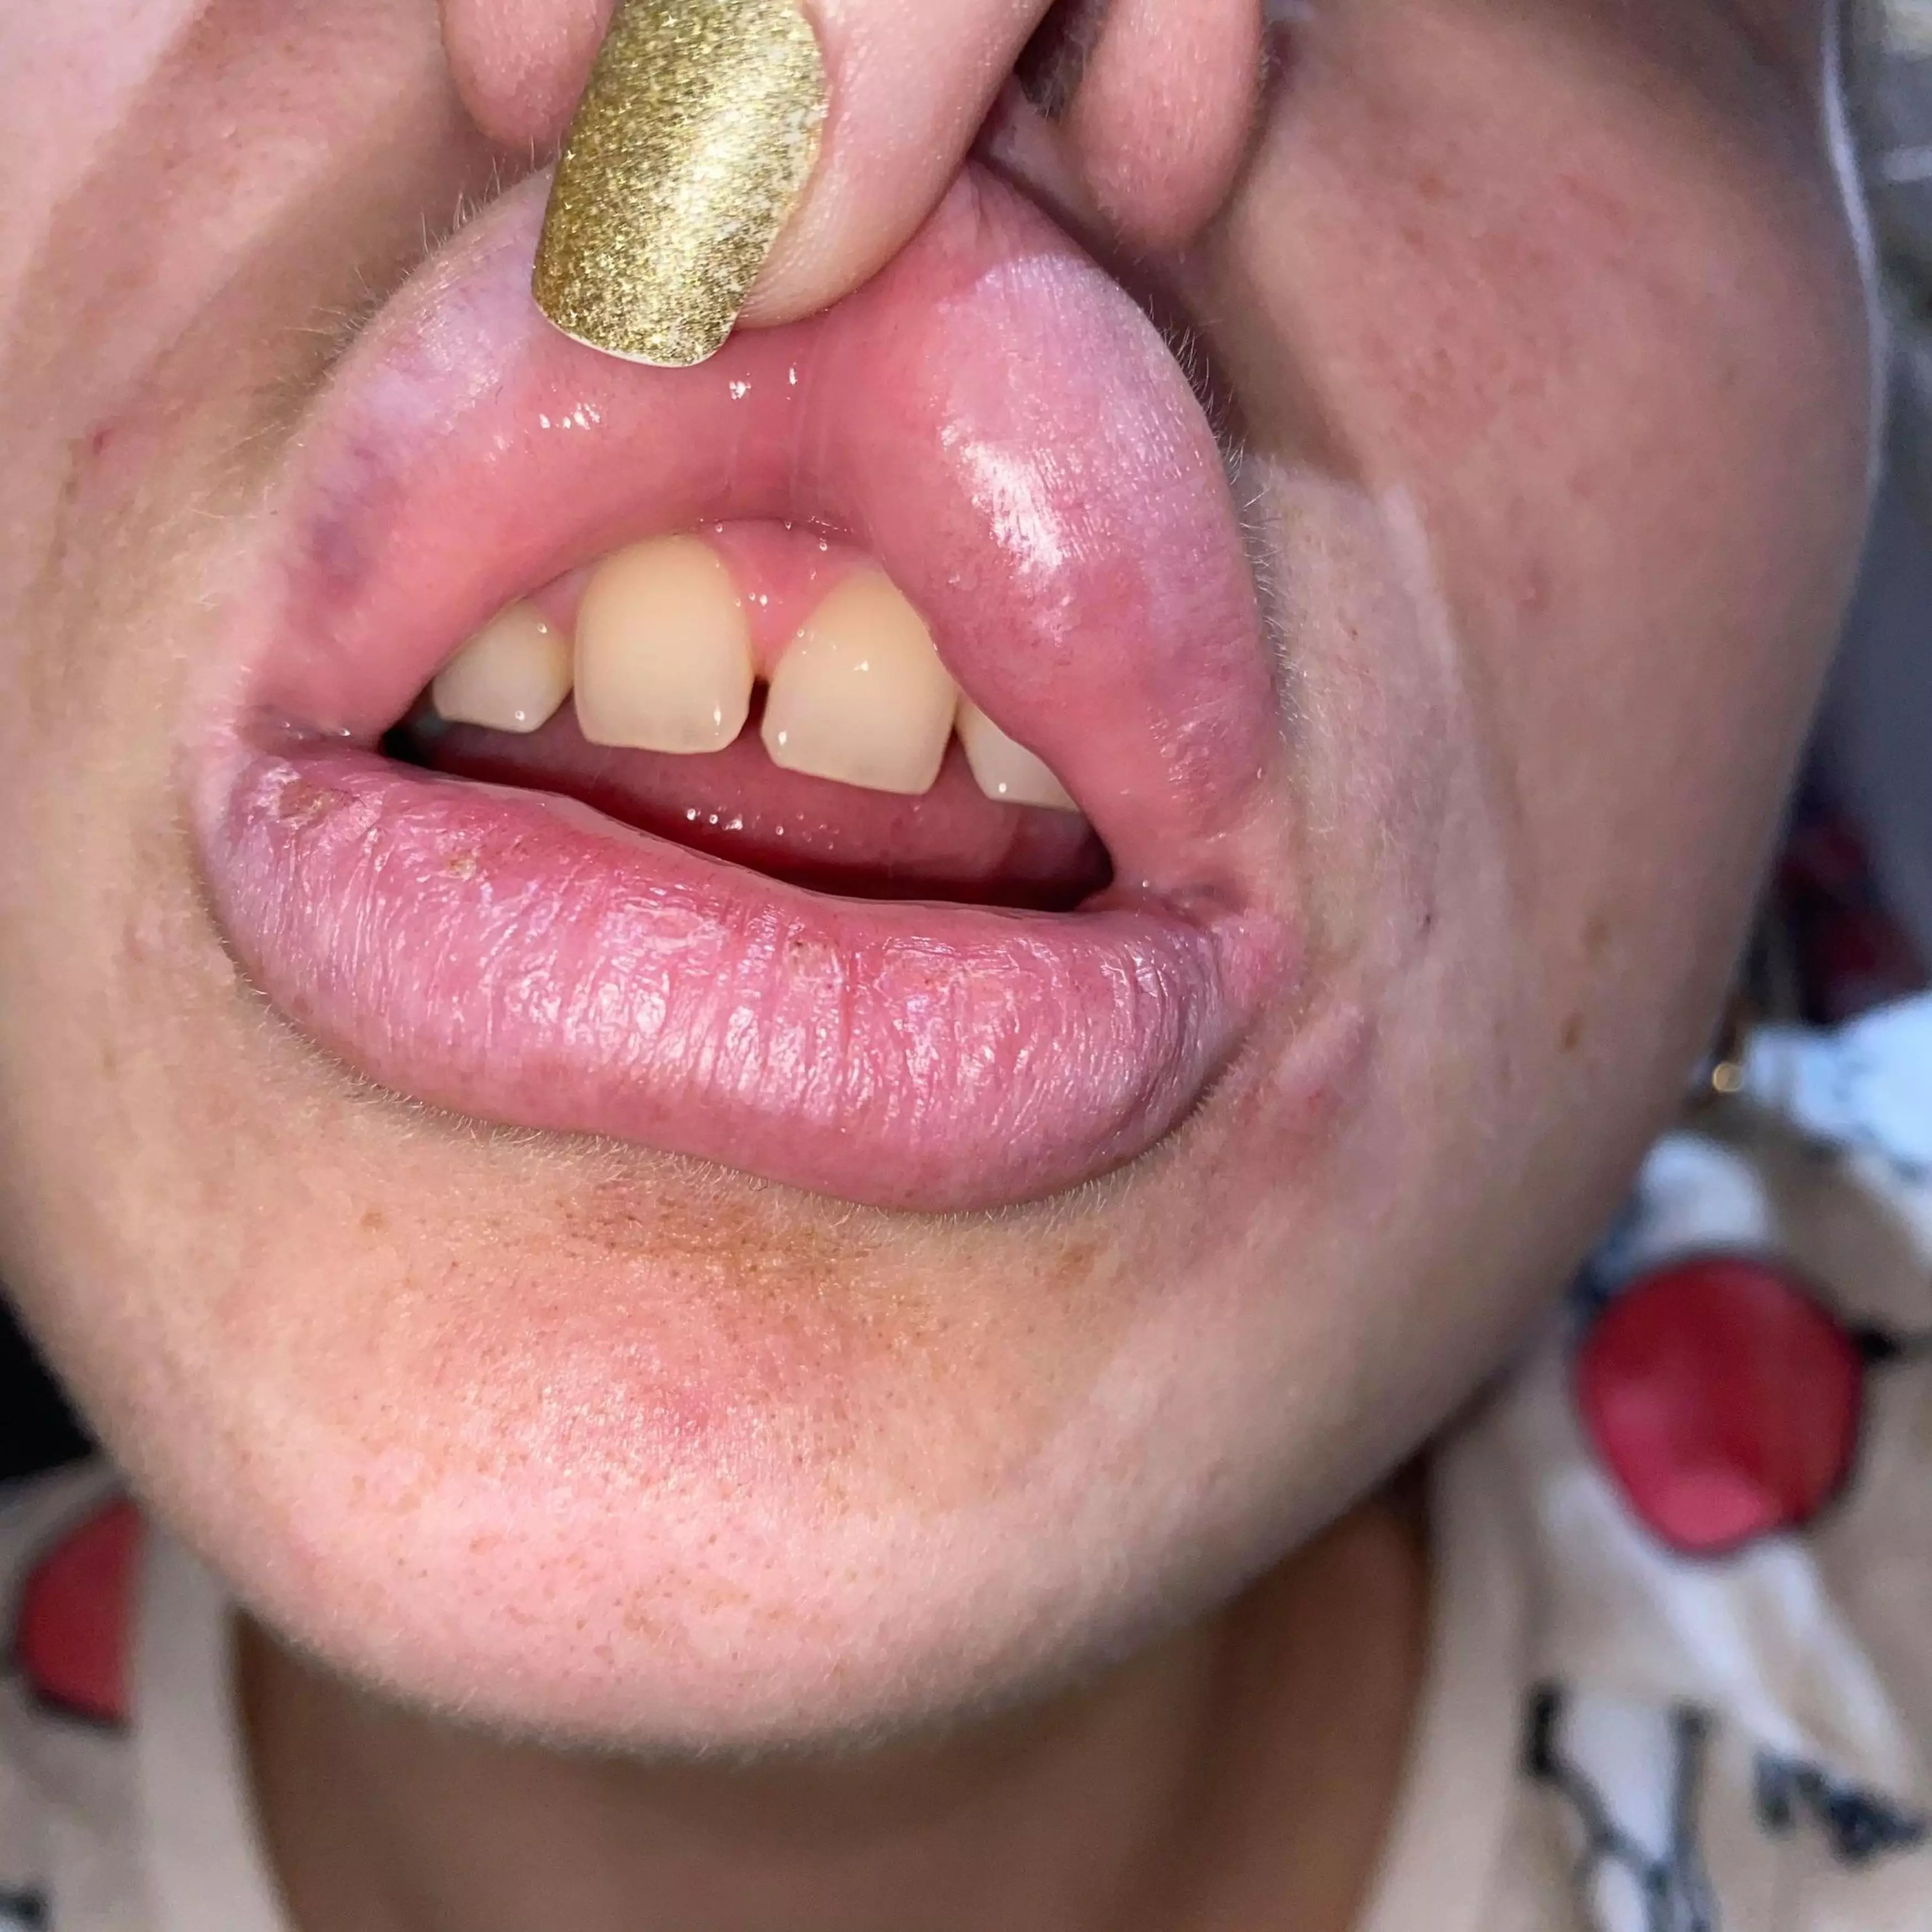 The full-time mum is sharing her ordeal in a bid to urge people to be careful when they get lip fillers (